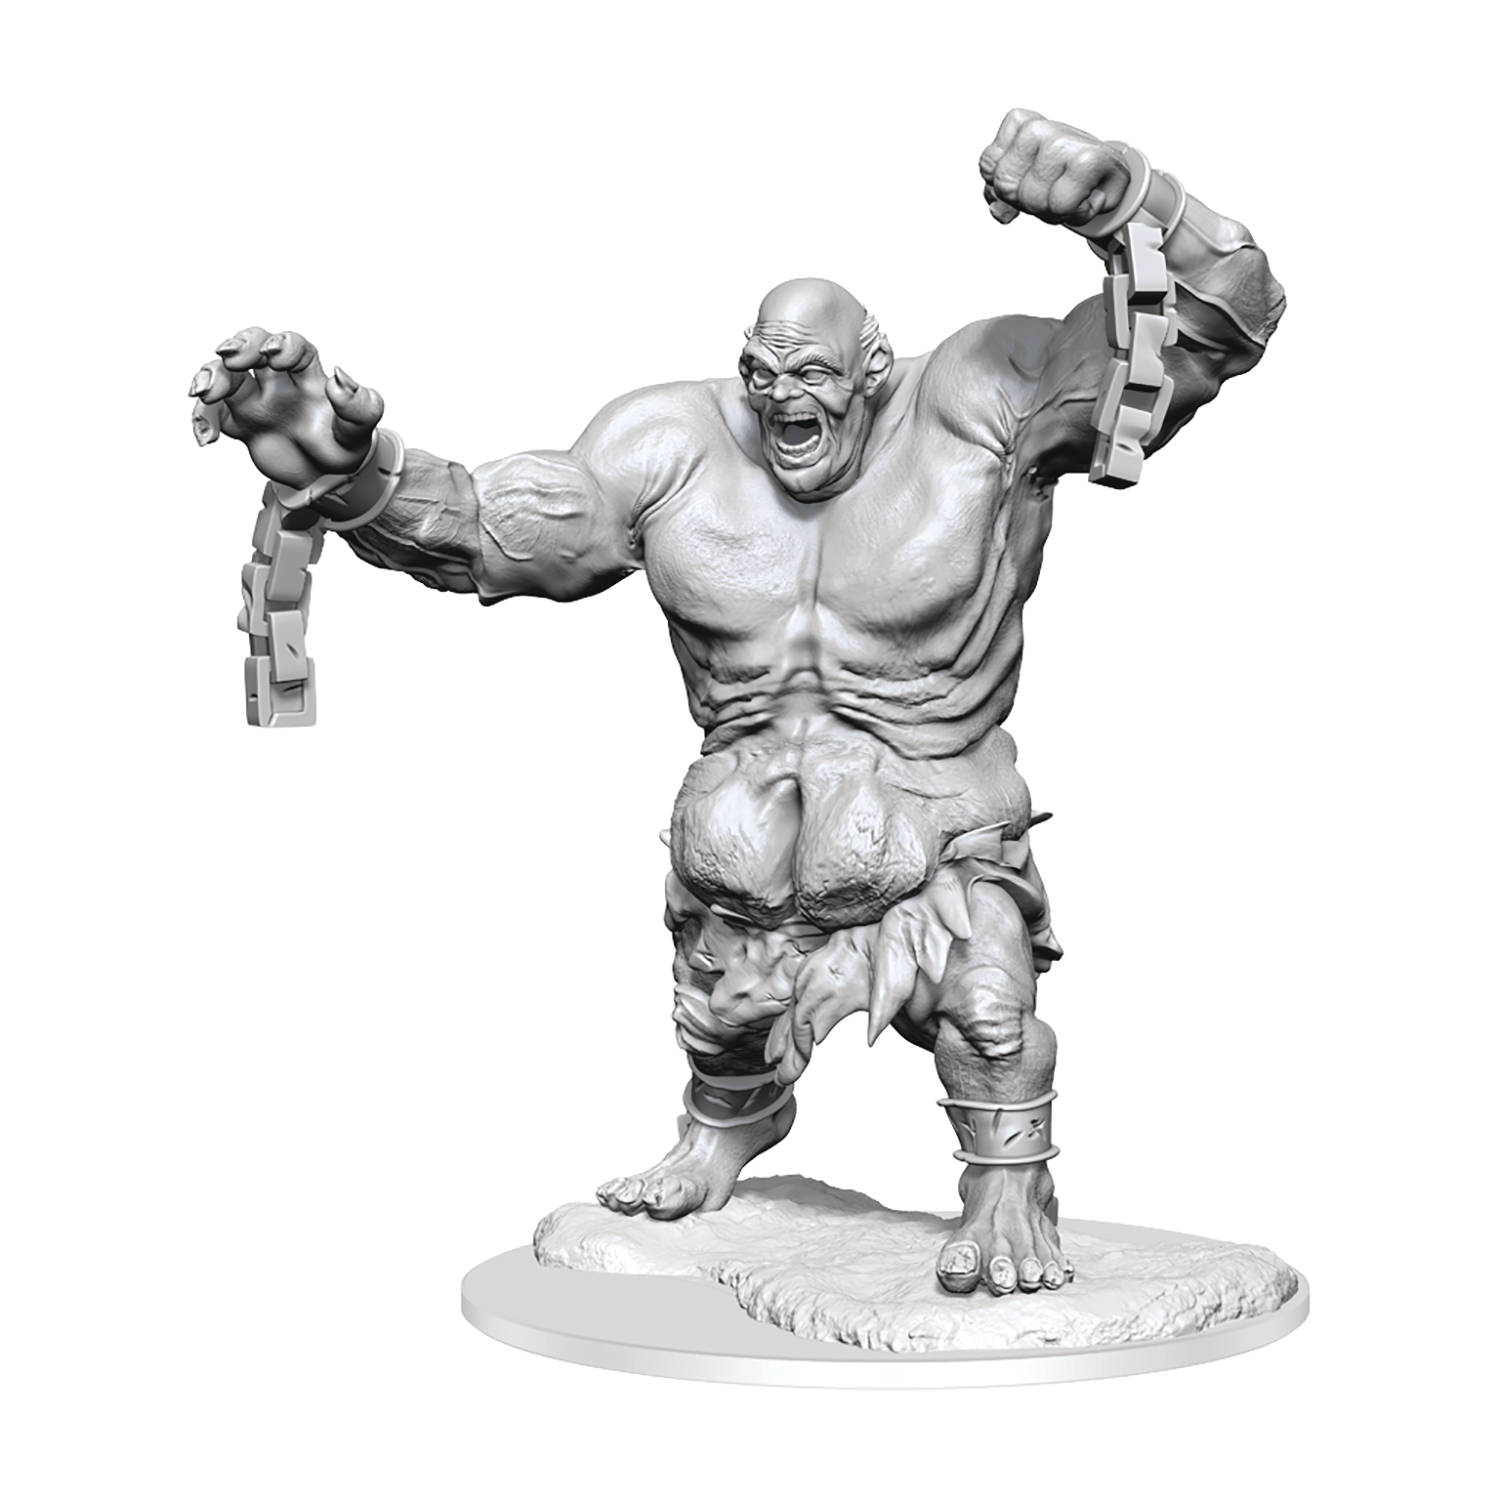 Dungeons & Dragons Nolzurs Marvelous Minis Mouth of Grolantor Figure